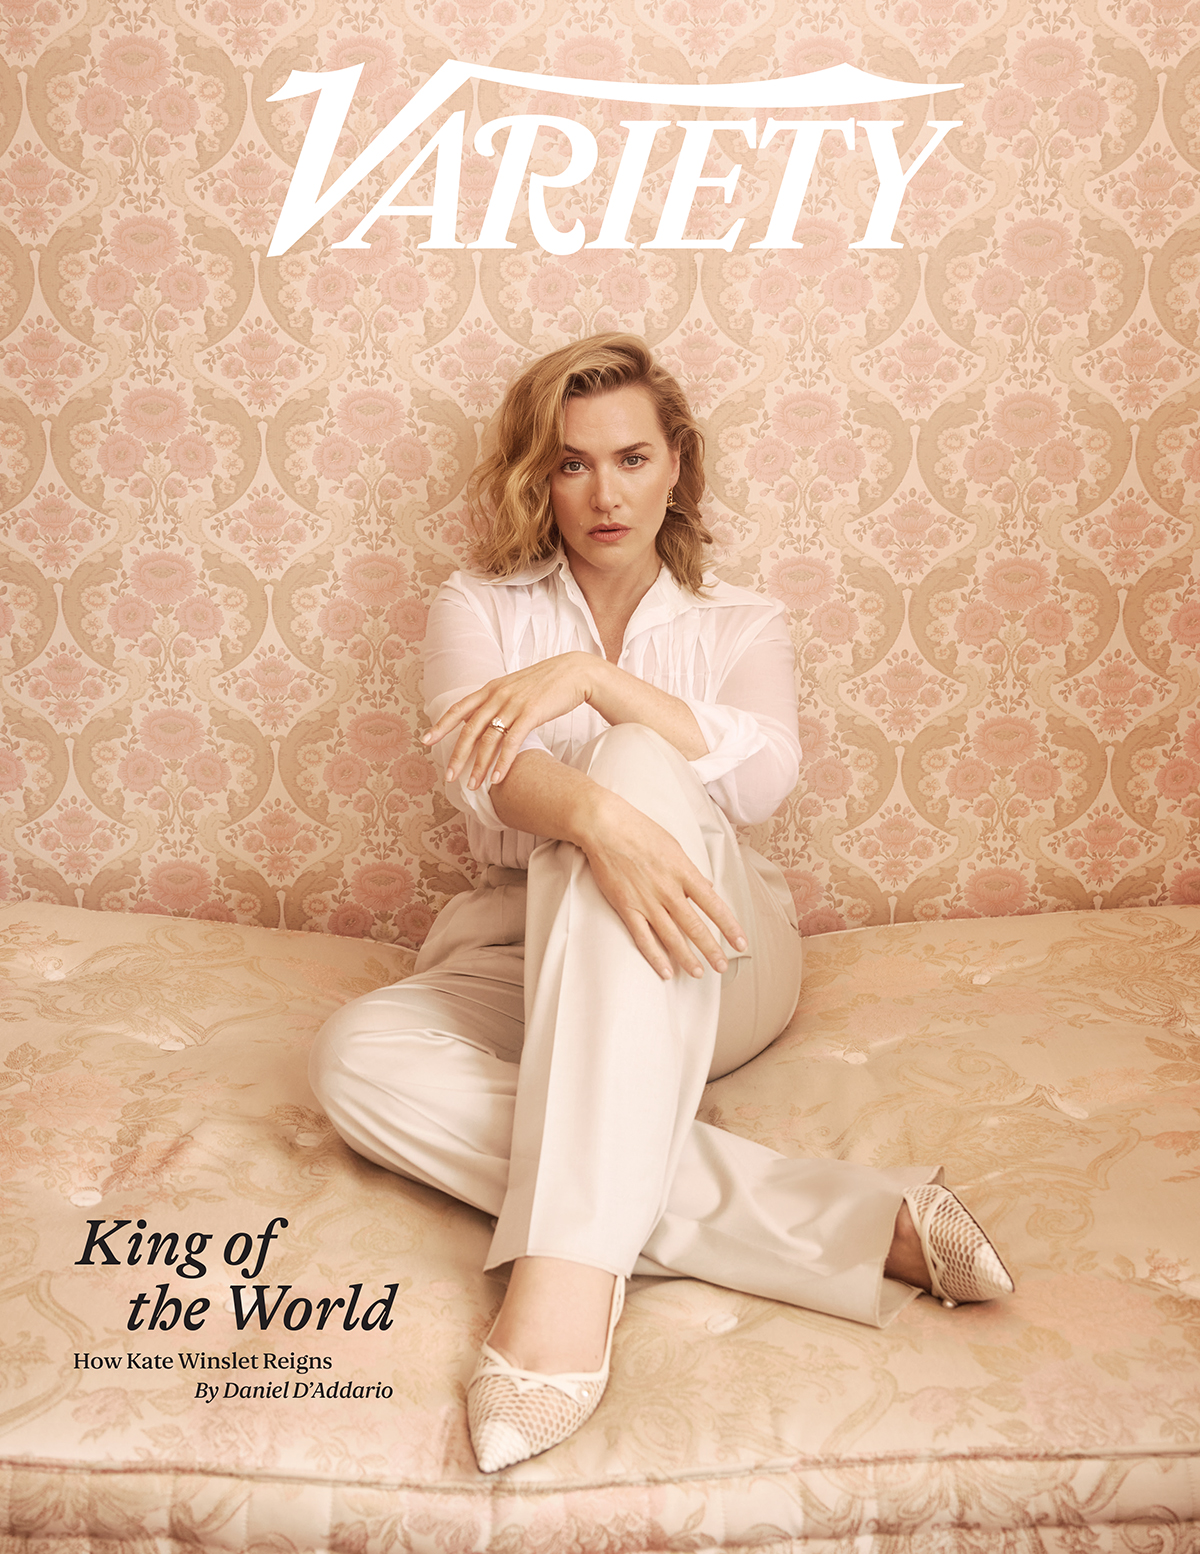 The full interview is in the new issue of Variety Magazine